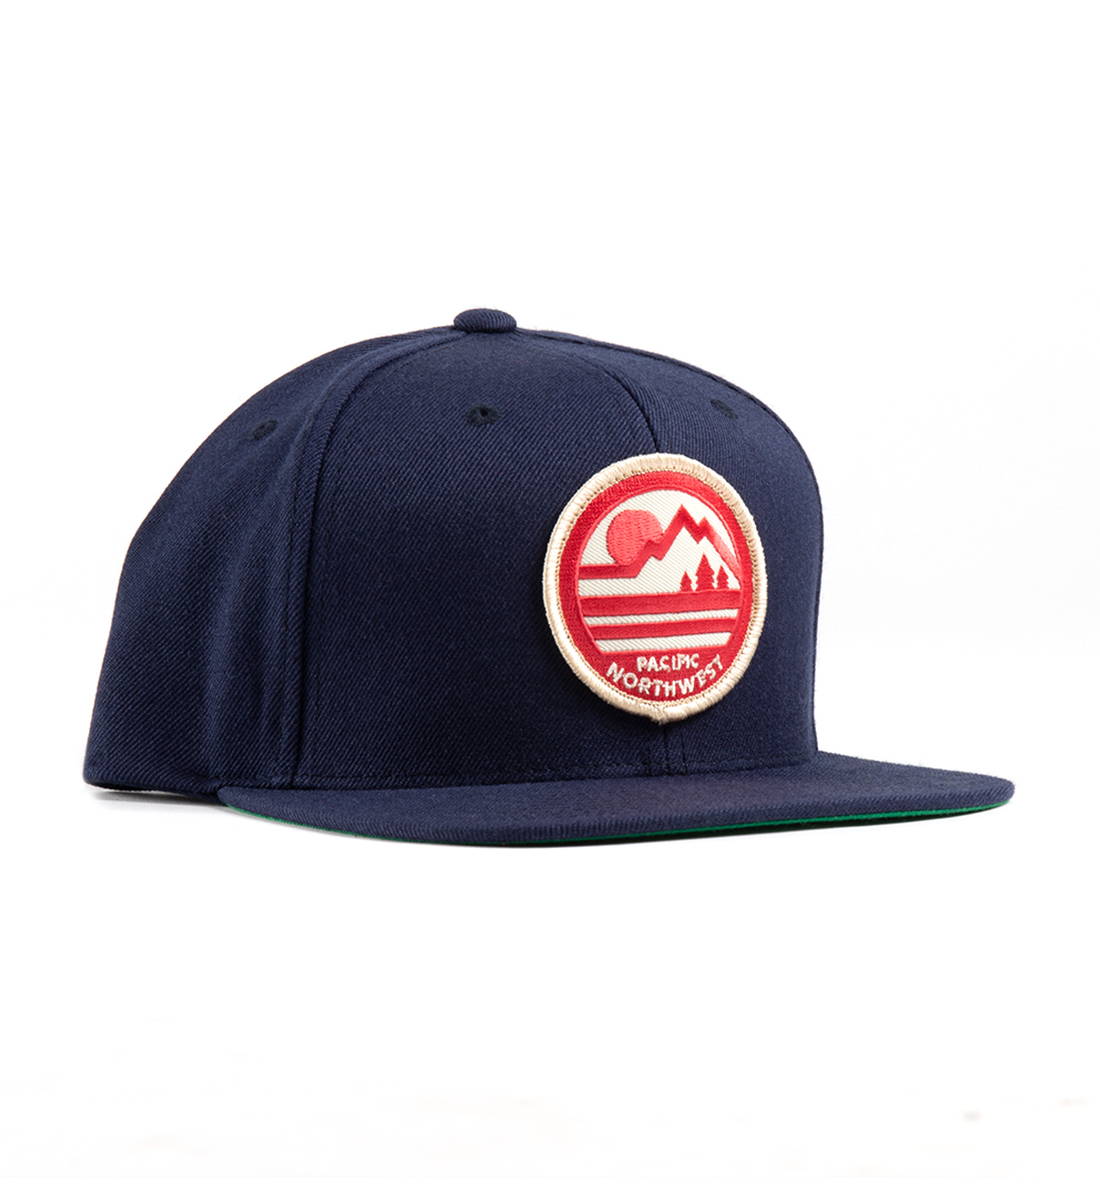 The Great PNW Wheeler Hat